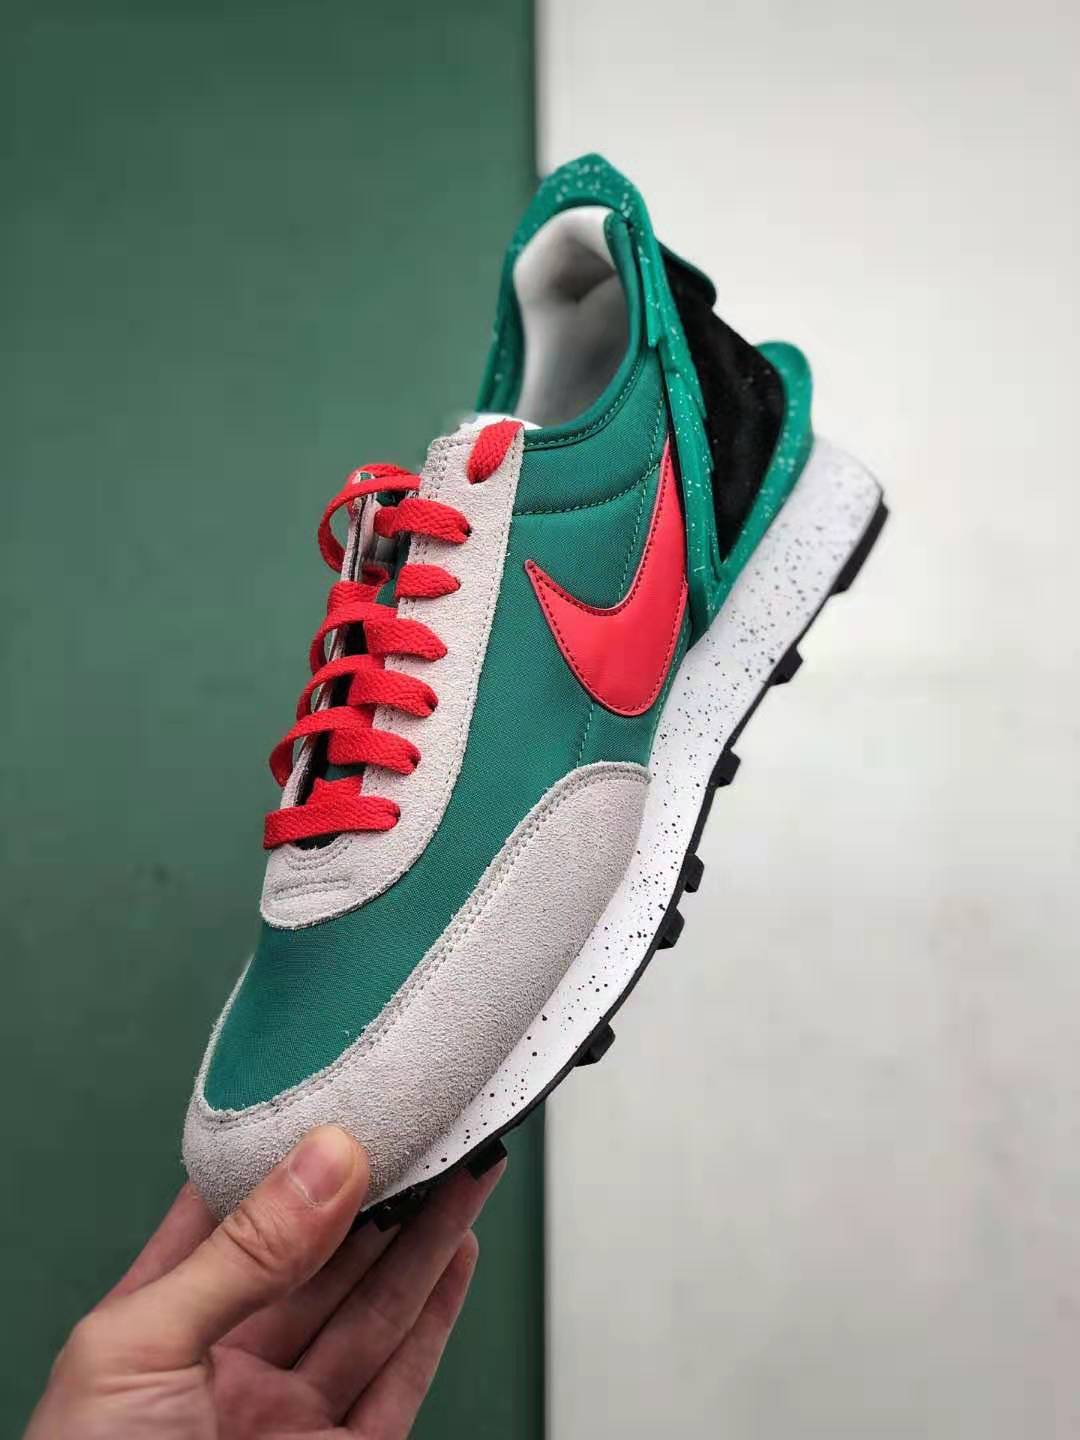 Undercover x Nike Waffle Racer Grass Green Grey Red AA6853 006 - Limited Edition Footwear